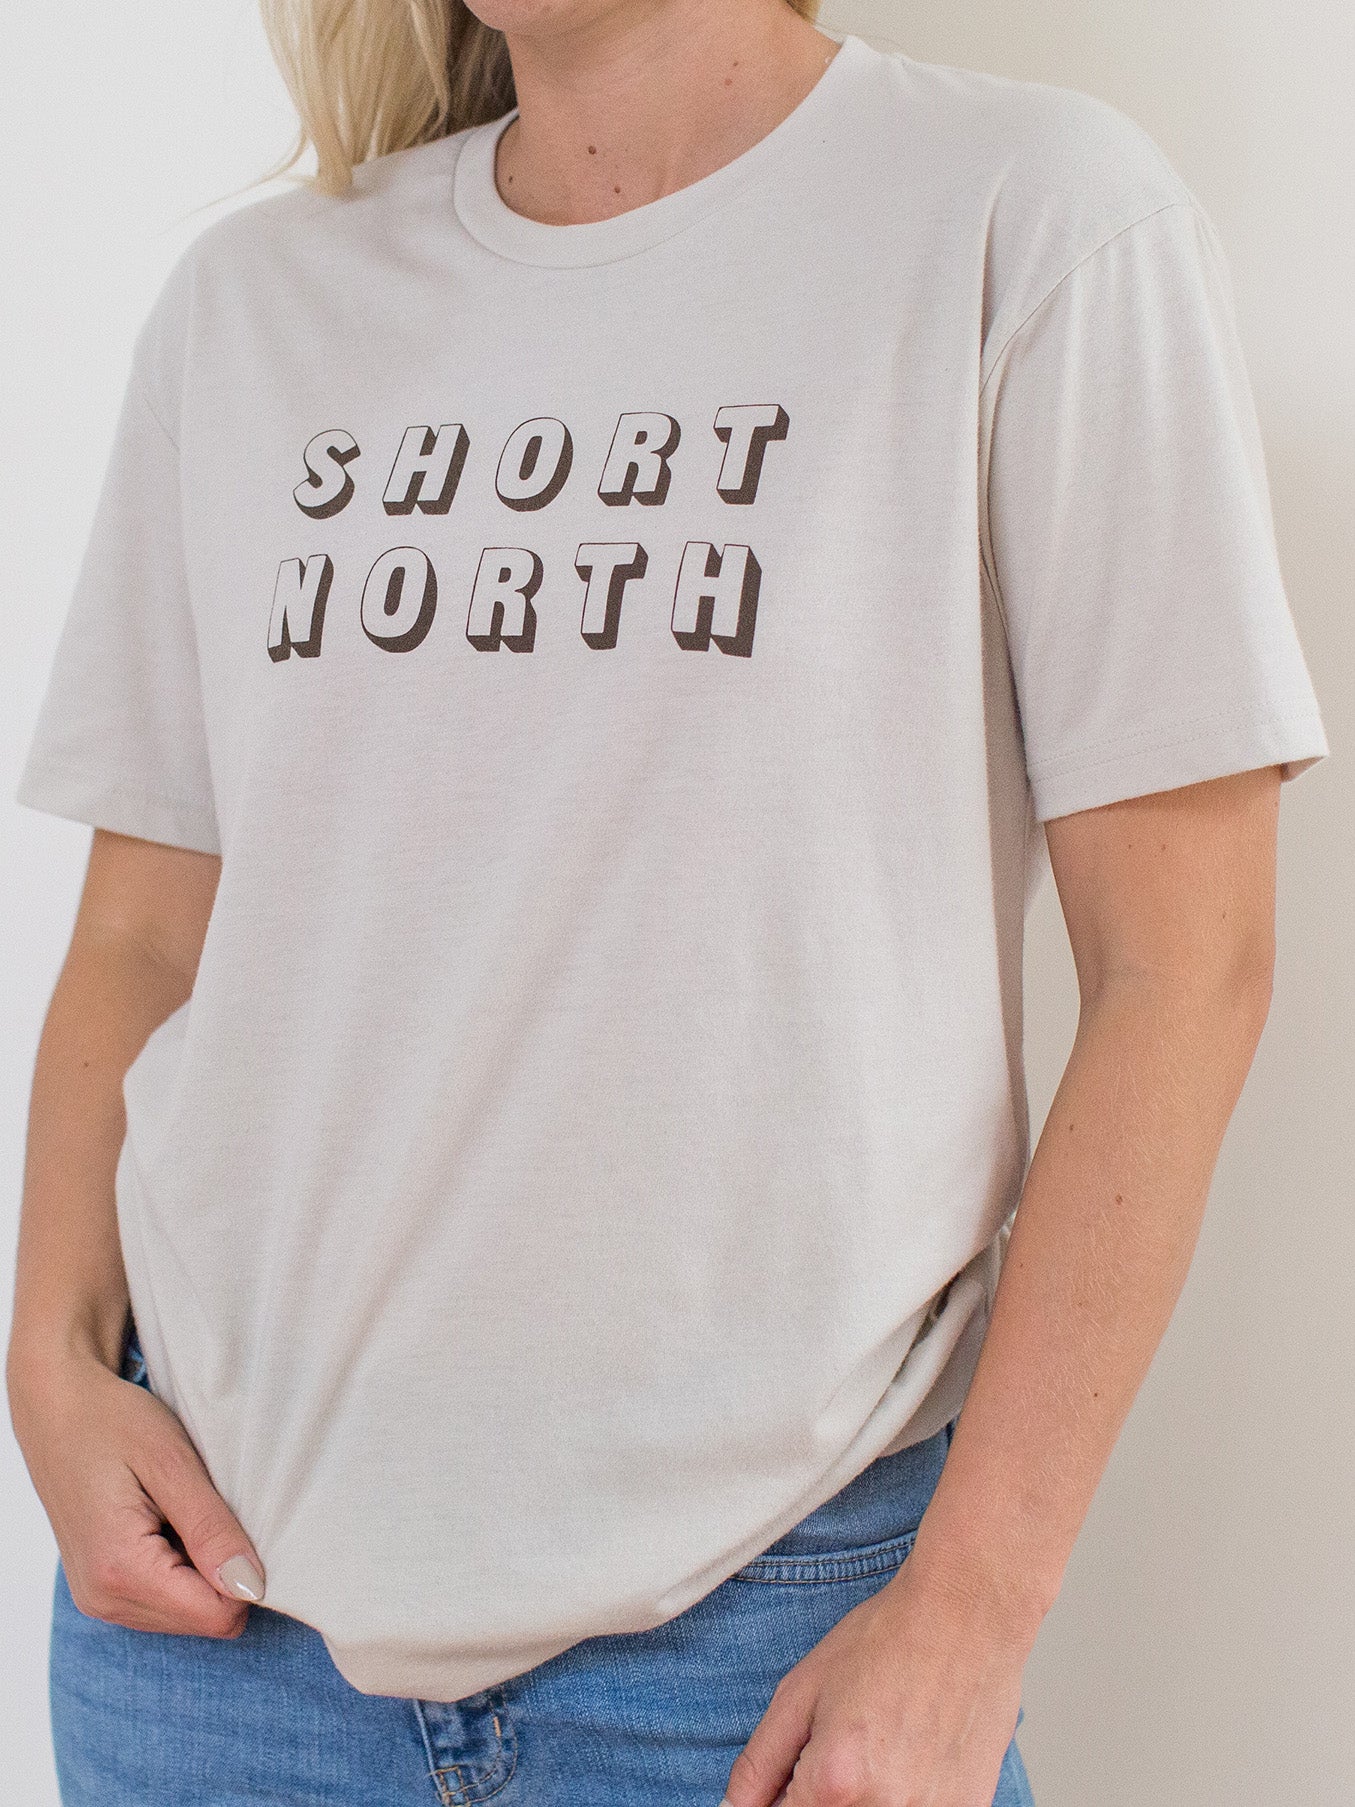 Model wearing sand colored sueded crewneck tee with Short North Columbus, Ohio graphic at front